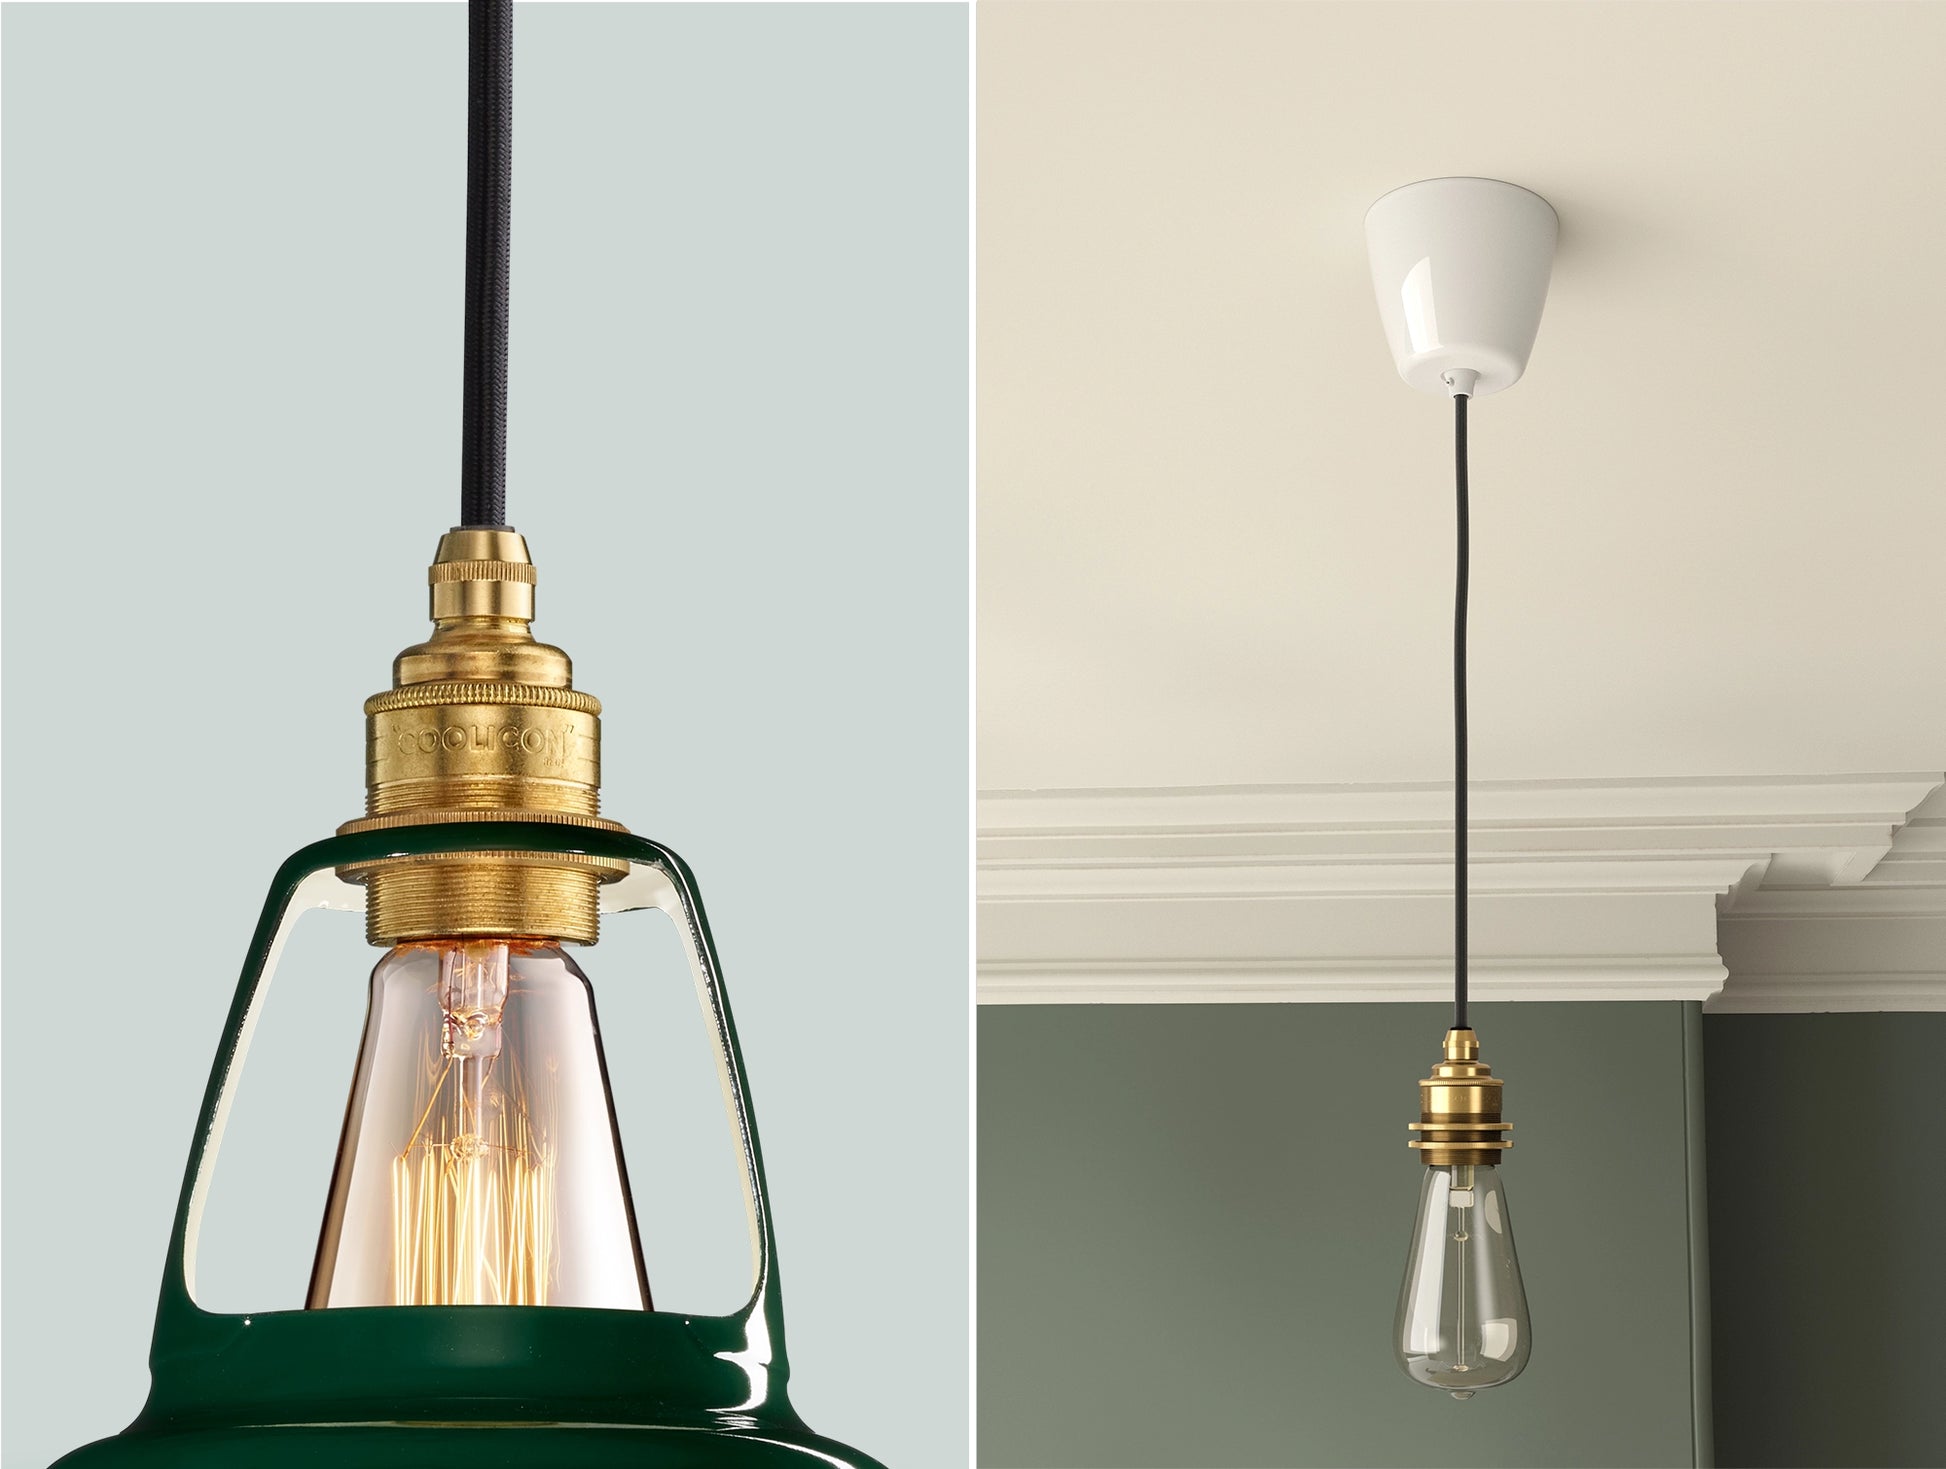 Two photos. On the left a close up of a Green Coolicon lampshade with a Brass pendant set. On the right a Brass pendant set with the braided cable, a white Vitreous Enamel ceiling cup and a lightbulb is hanging from the ceiling